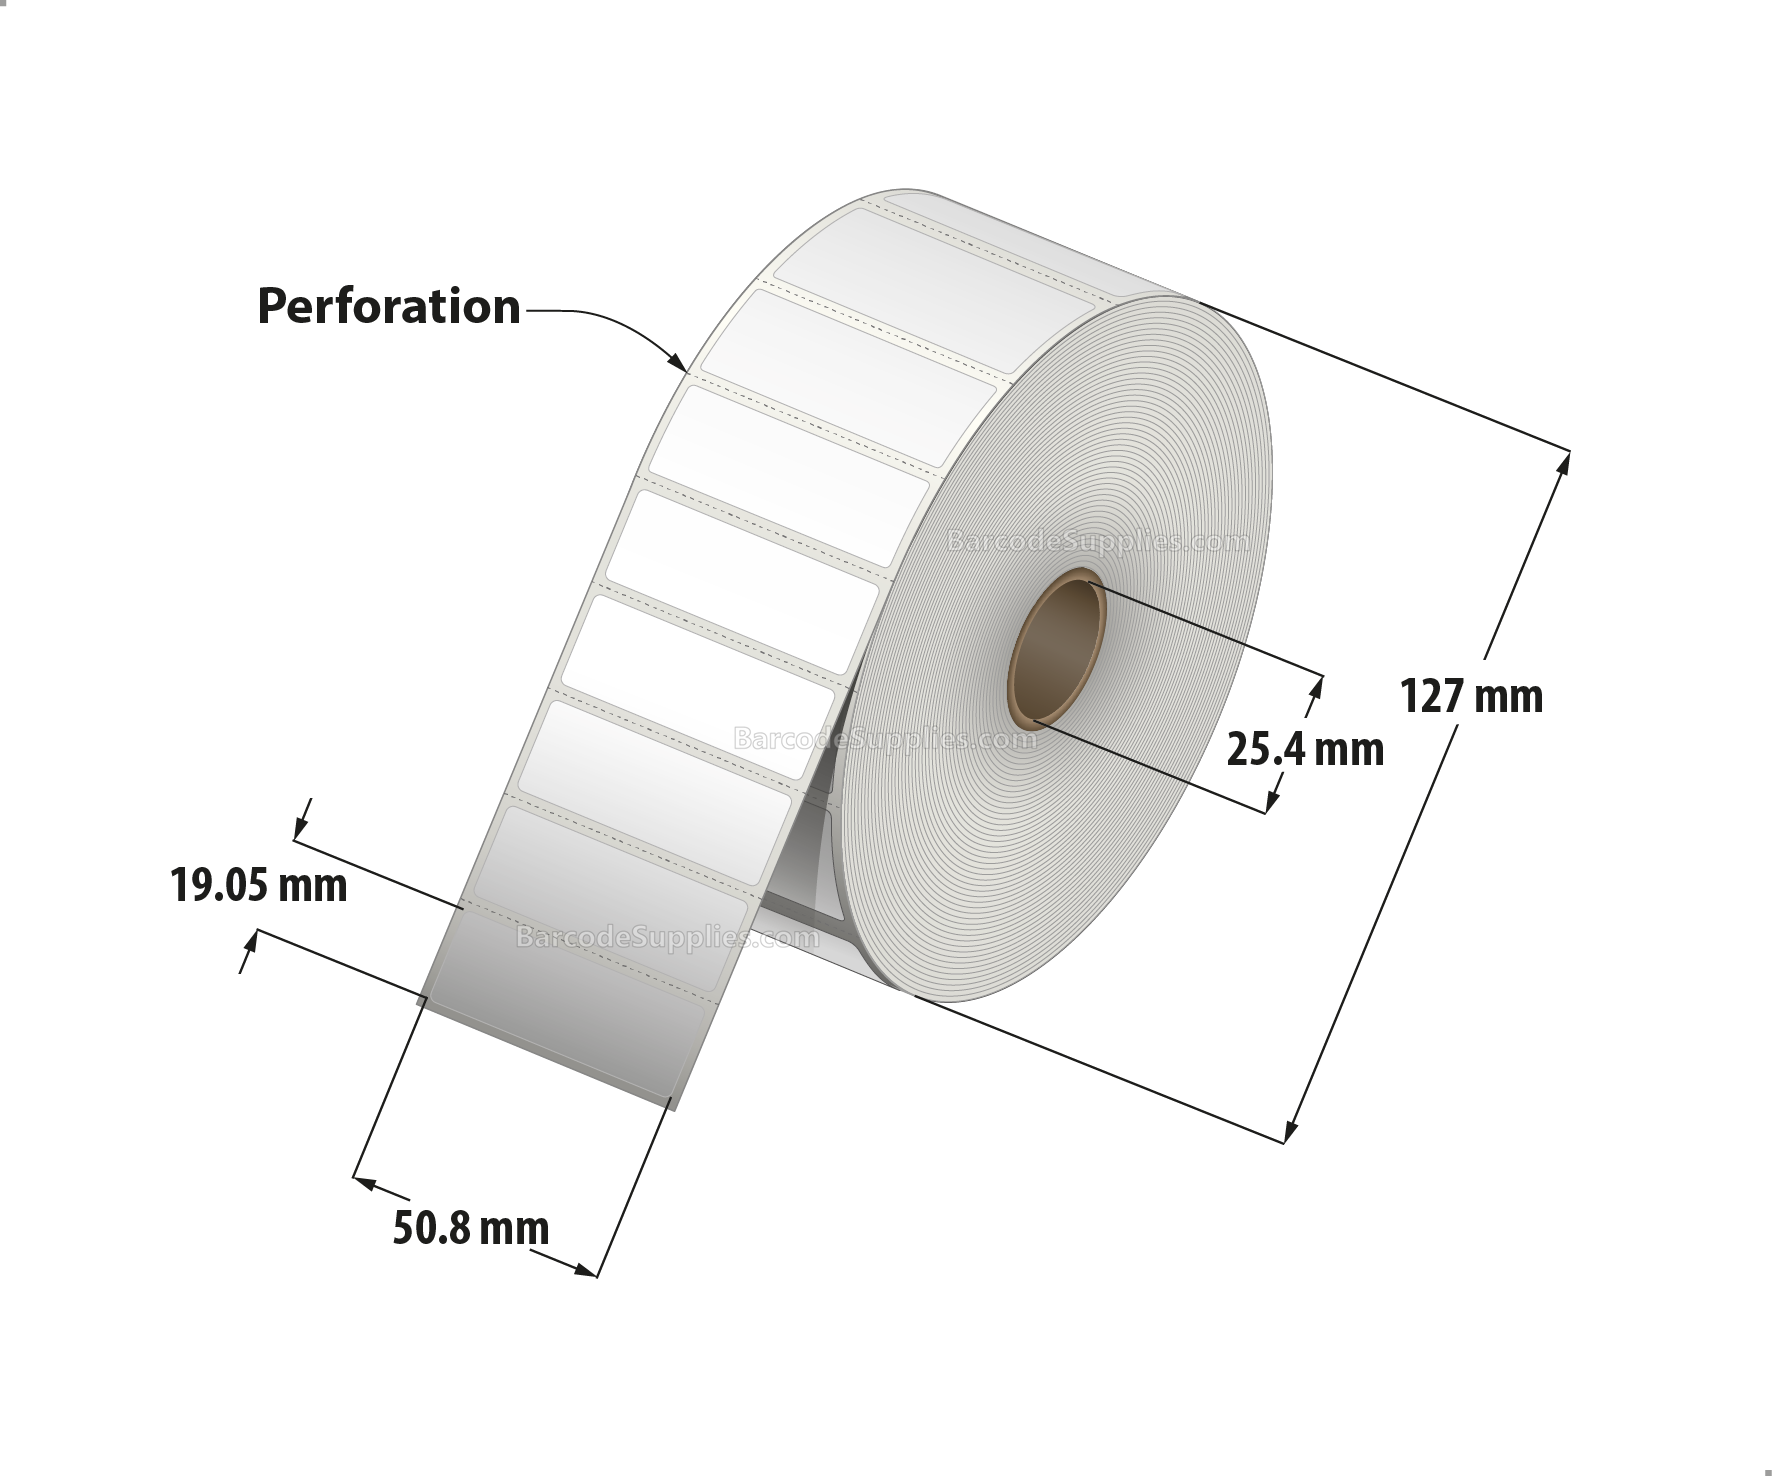 2 x 0.75 Thermal Transfer White Labels With Permanent Acrylic Adhesive - Perforated - 3000 Labels Per Roll - Carton Of 4 Rolls - 12000 Labels Total - MPN: TH275-1PTTPOLY